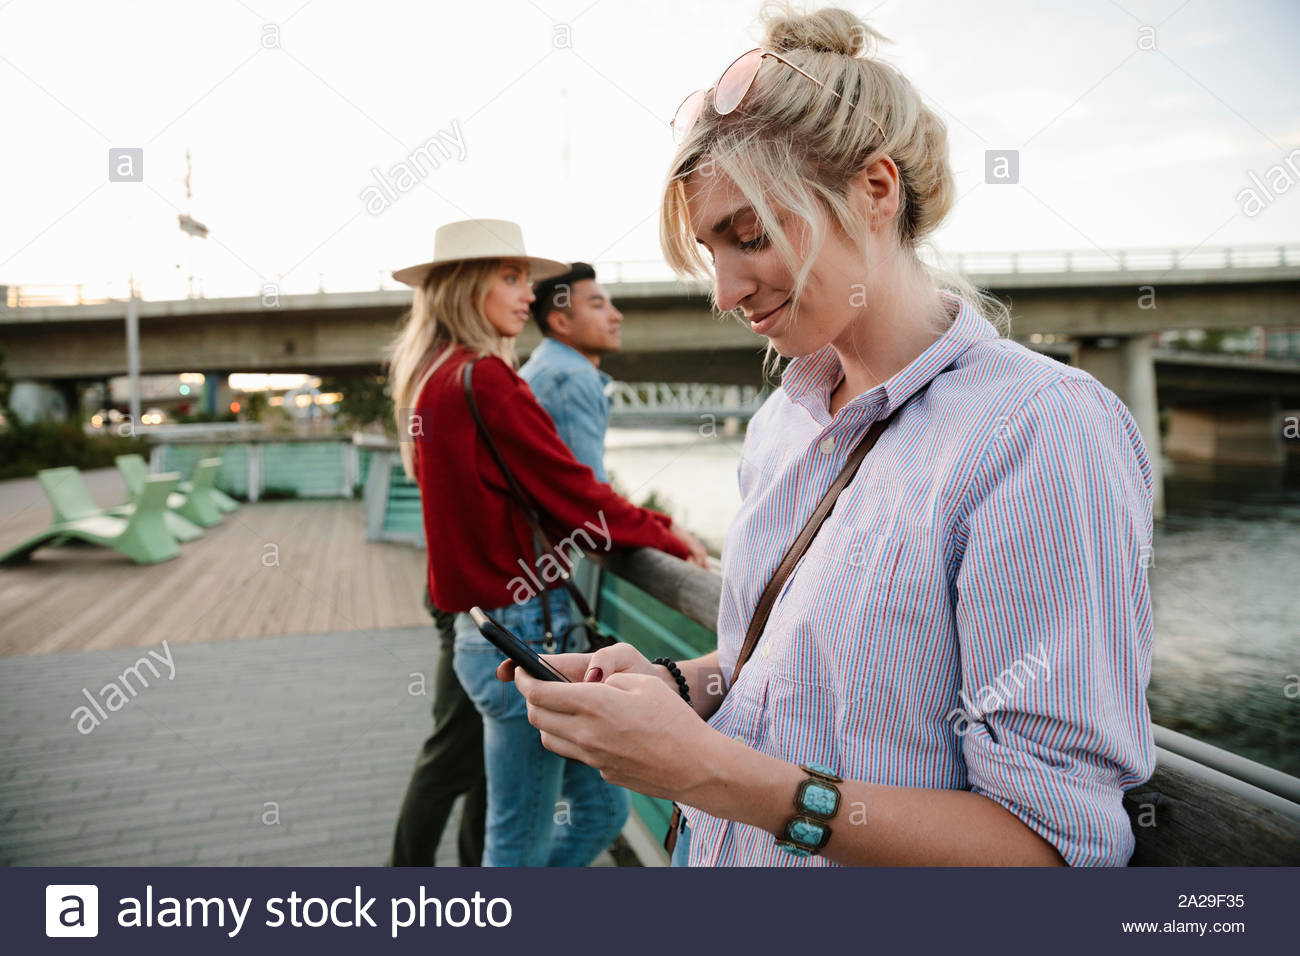 Young woman using smart phone at urban waterfront Banque D'Images